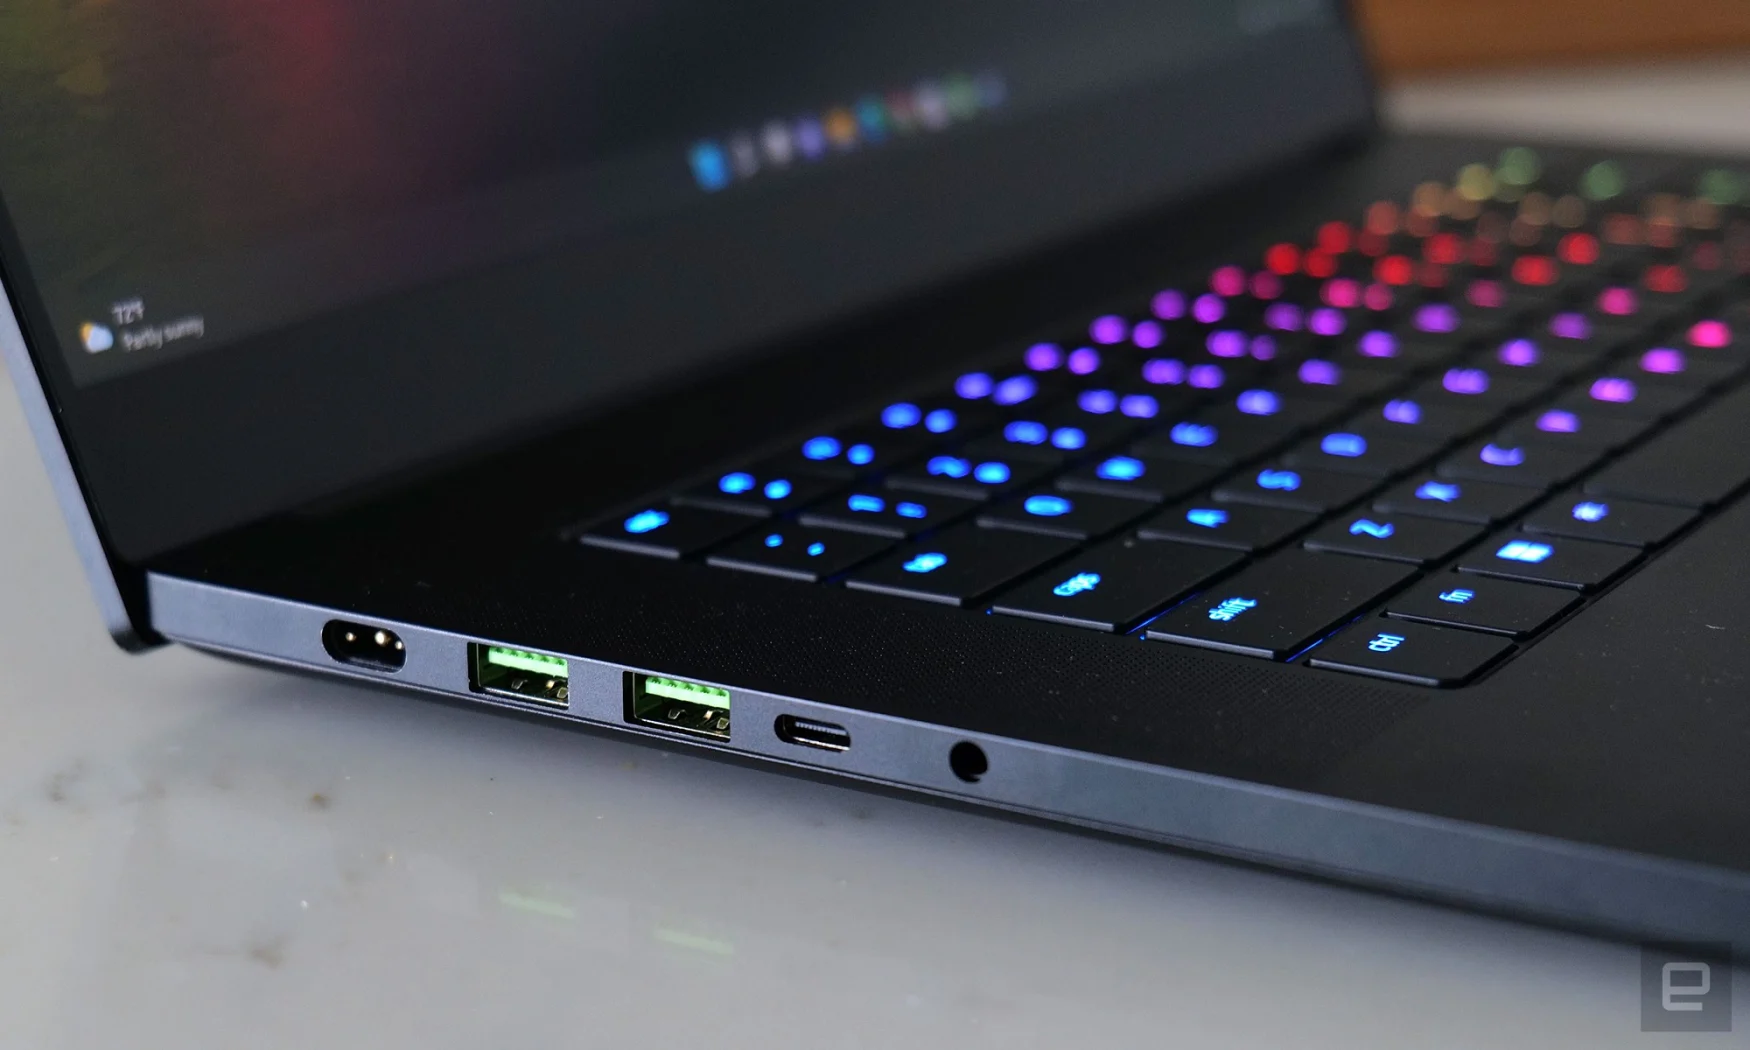 Because of its beefy components, Razer uses a proprietary power jack for the Blade 15 charging brick. 